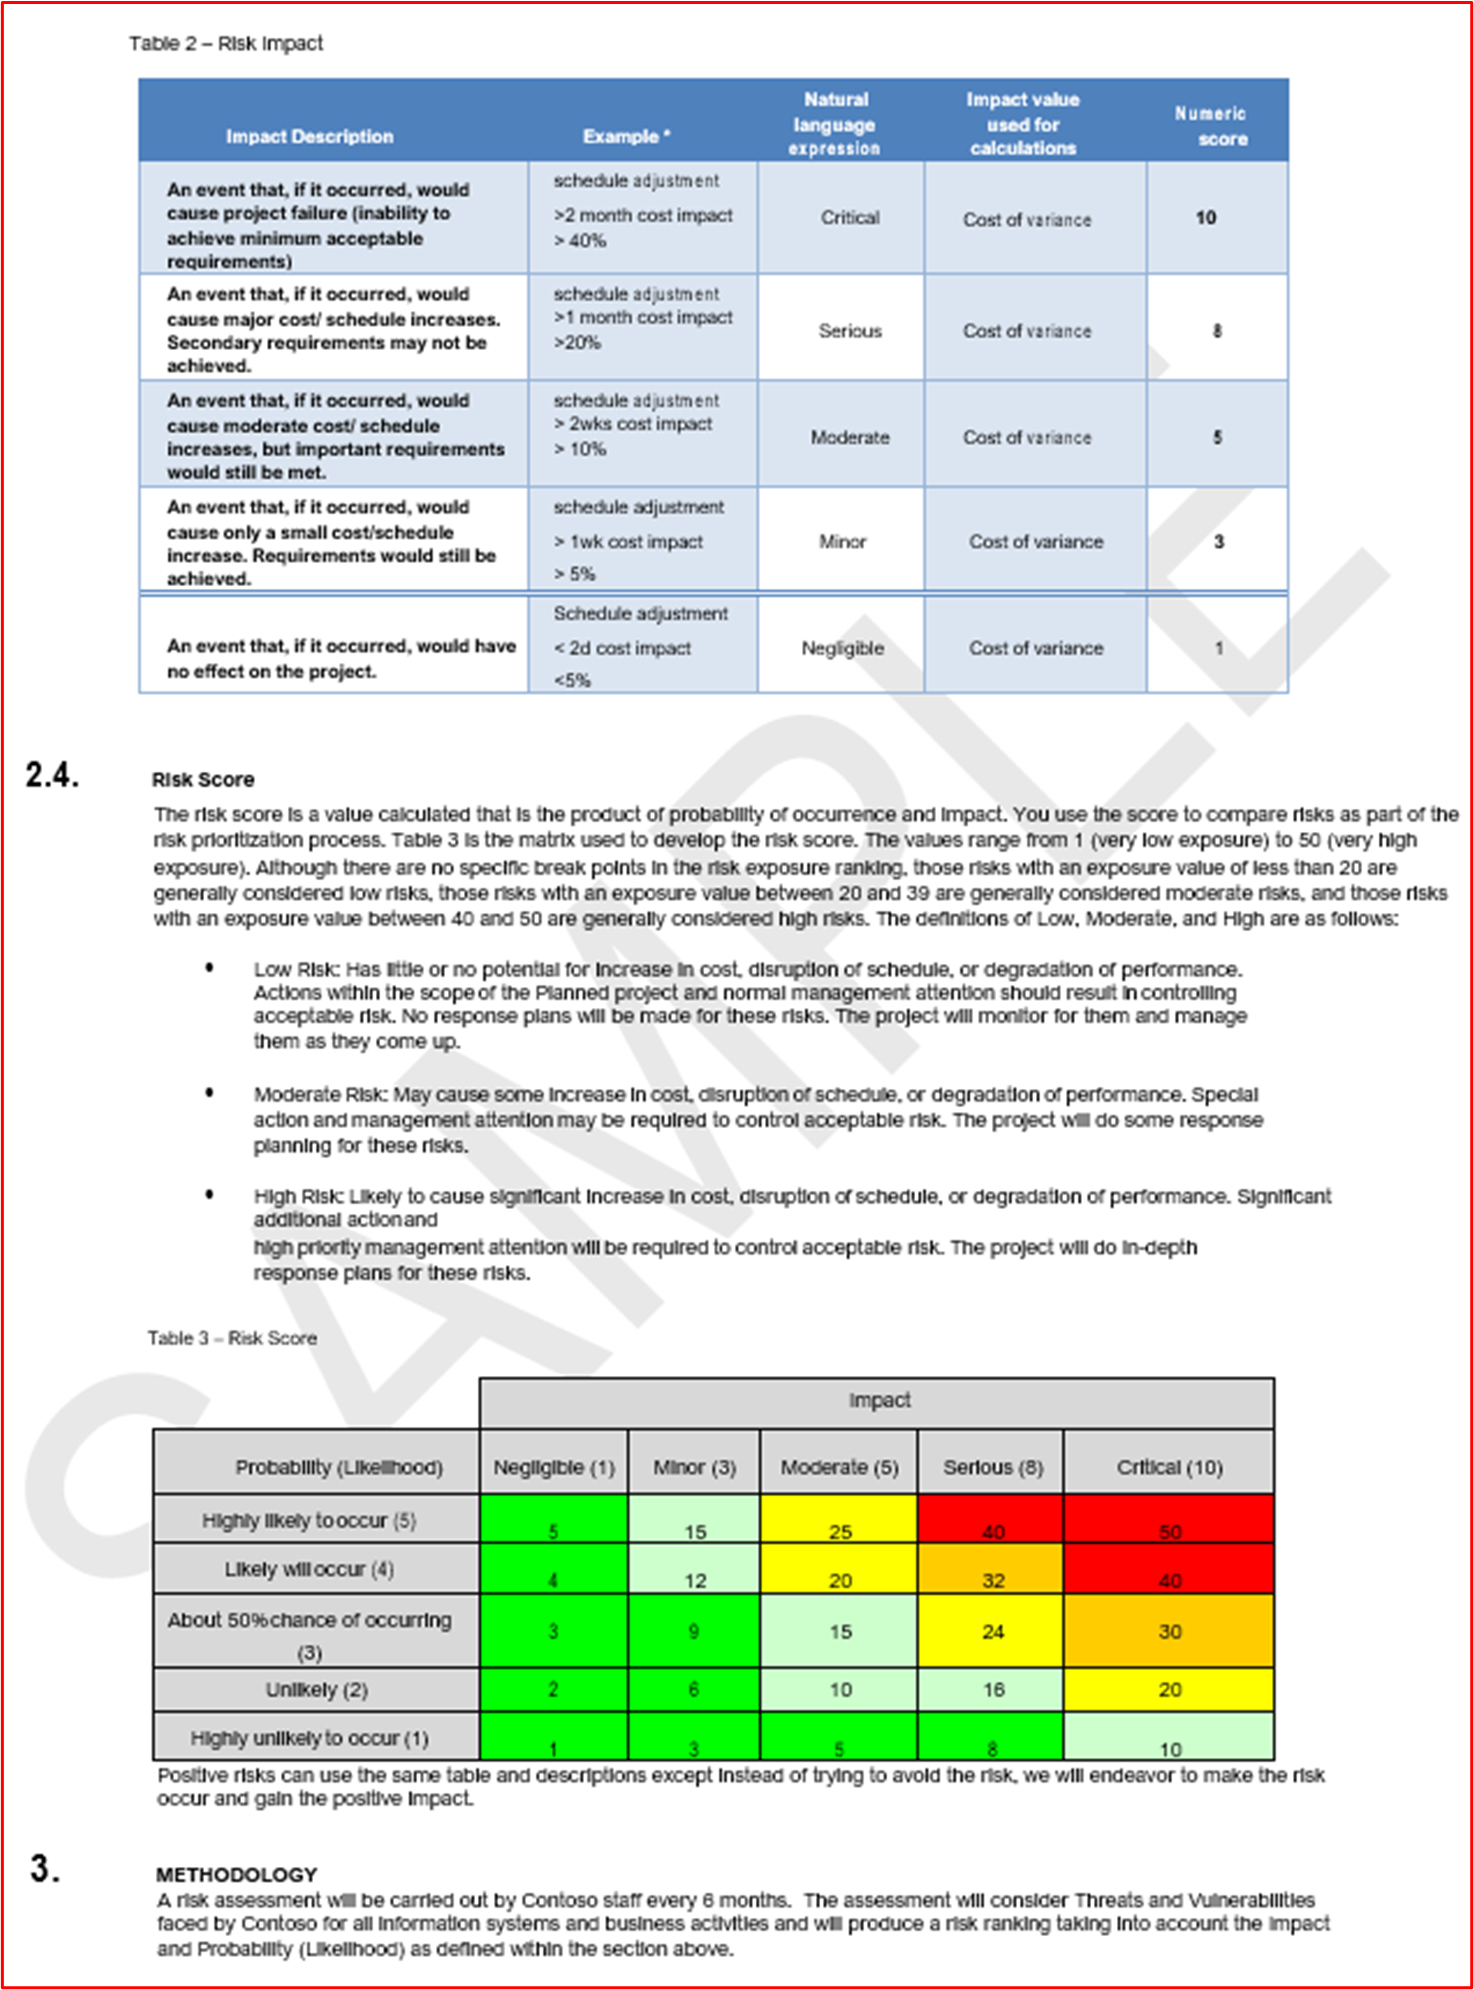 The following evidence is a screenshot of the expanded part of Contoso's risk assessment process.